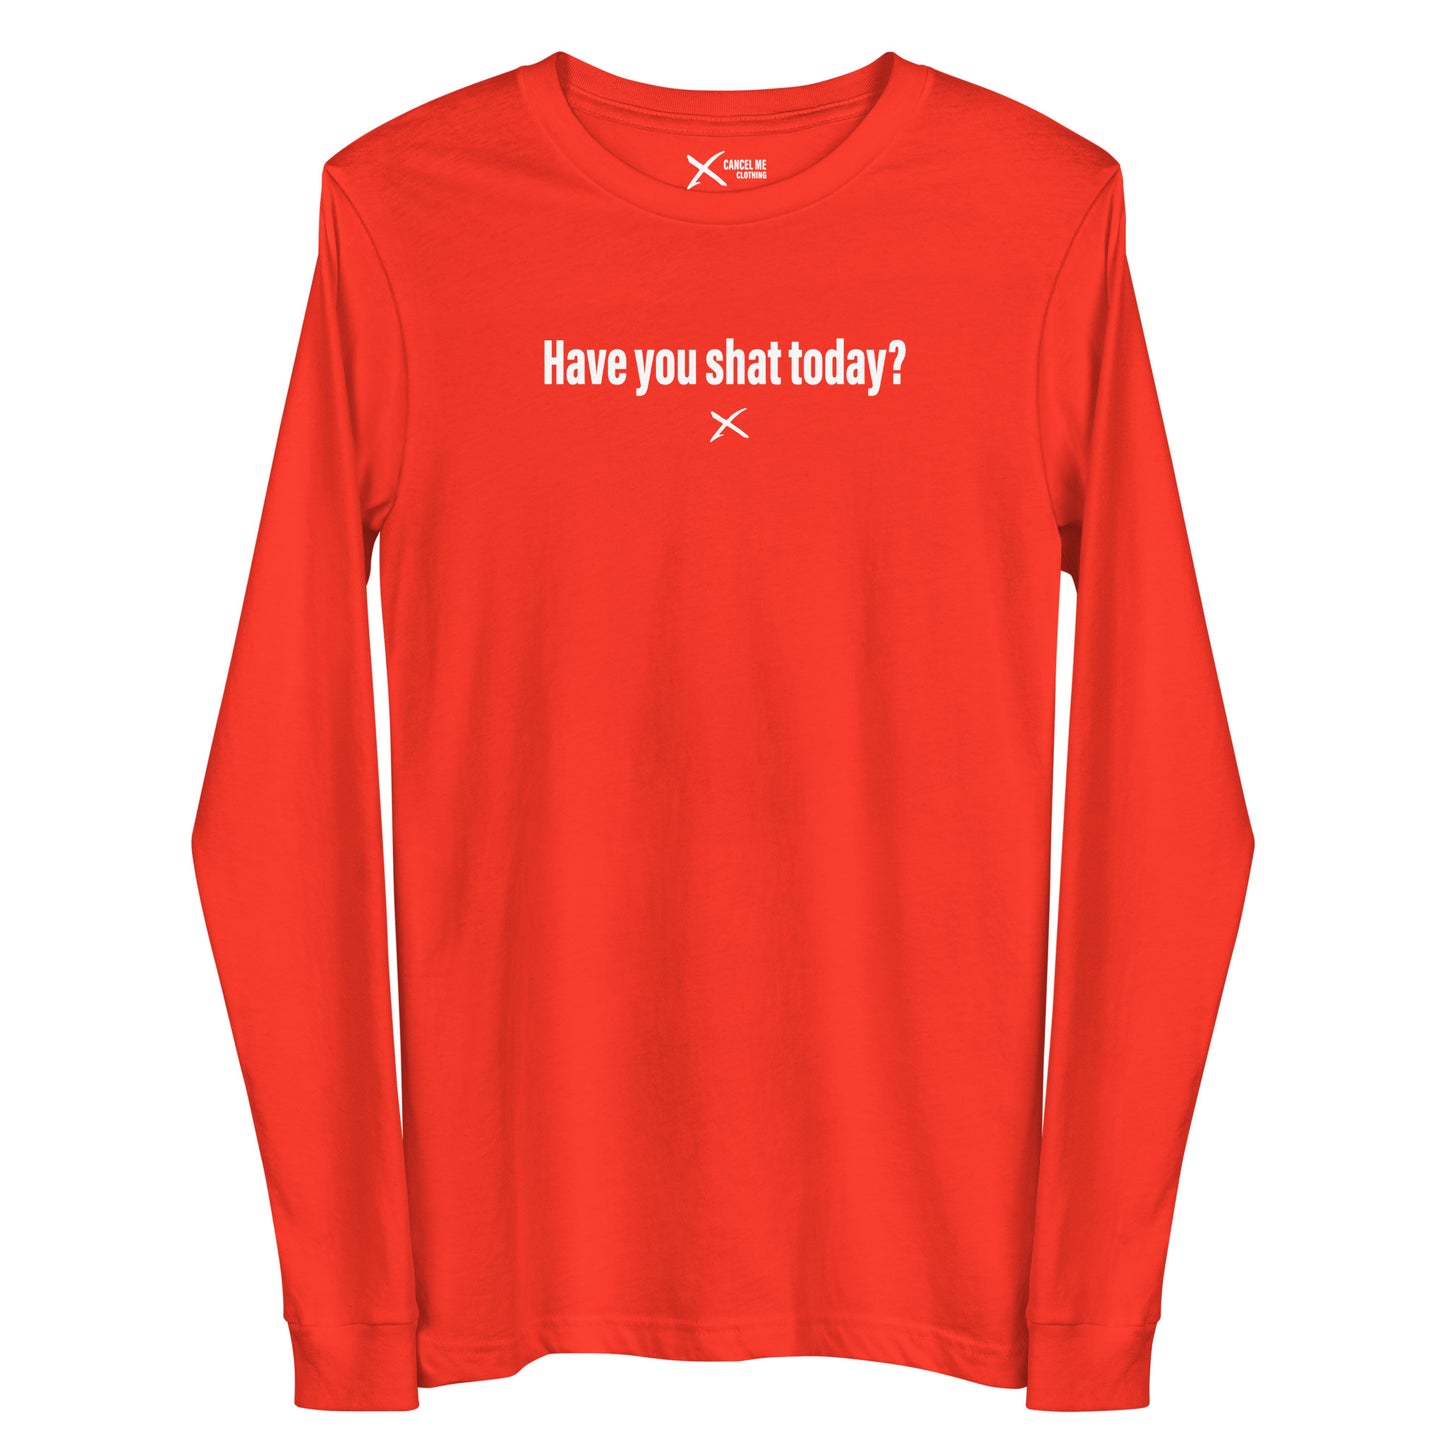 Have you shat today? - Longsleeve